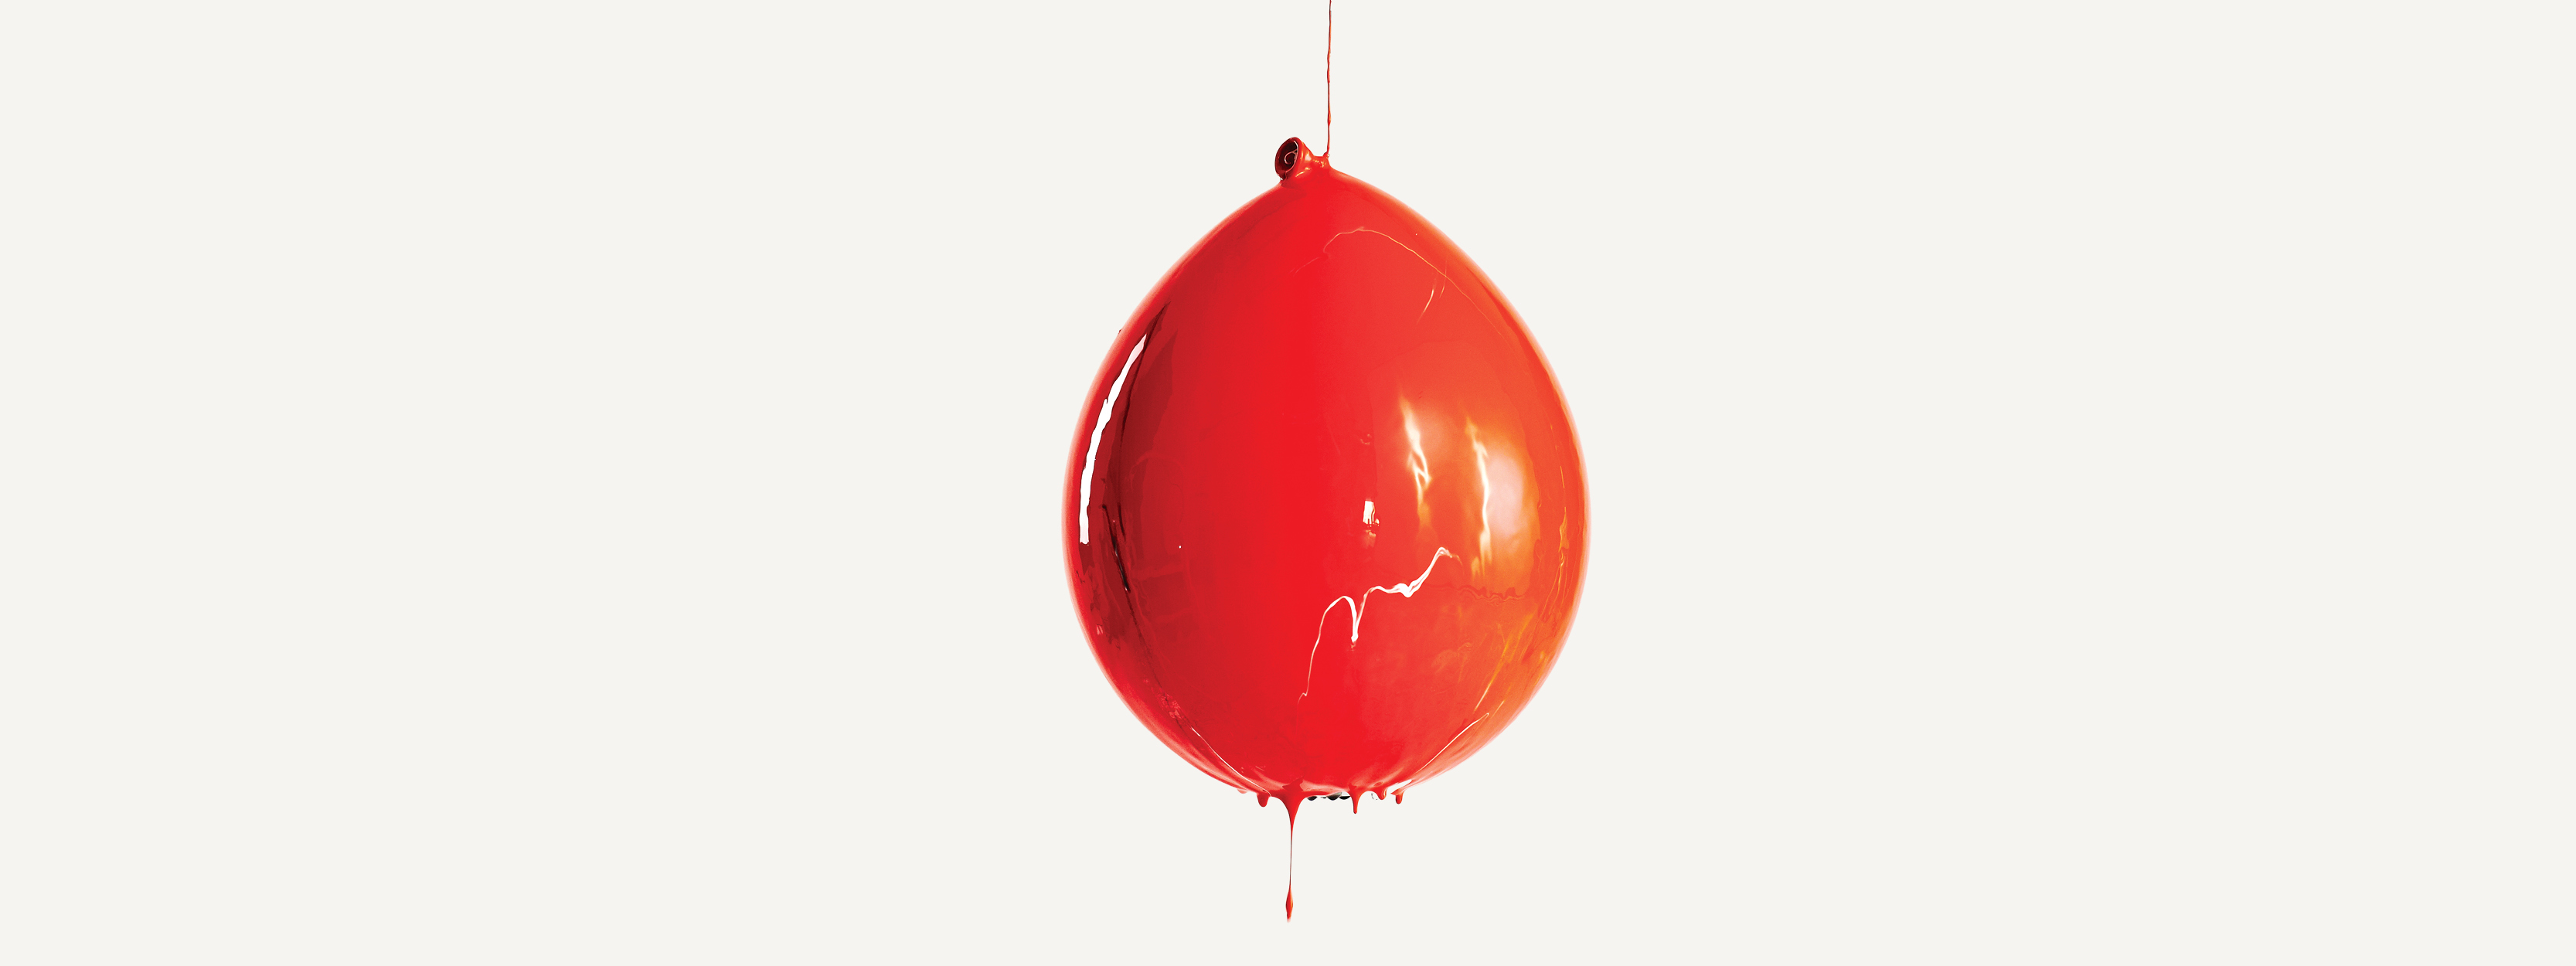 A balloon covered in red paint